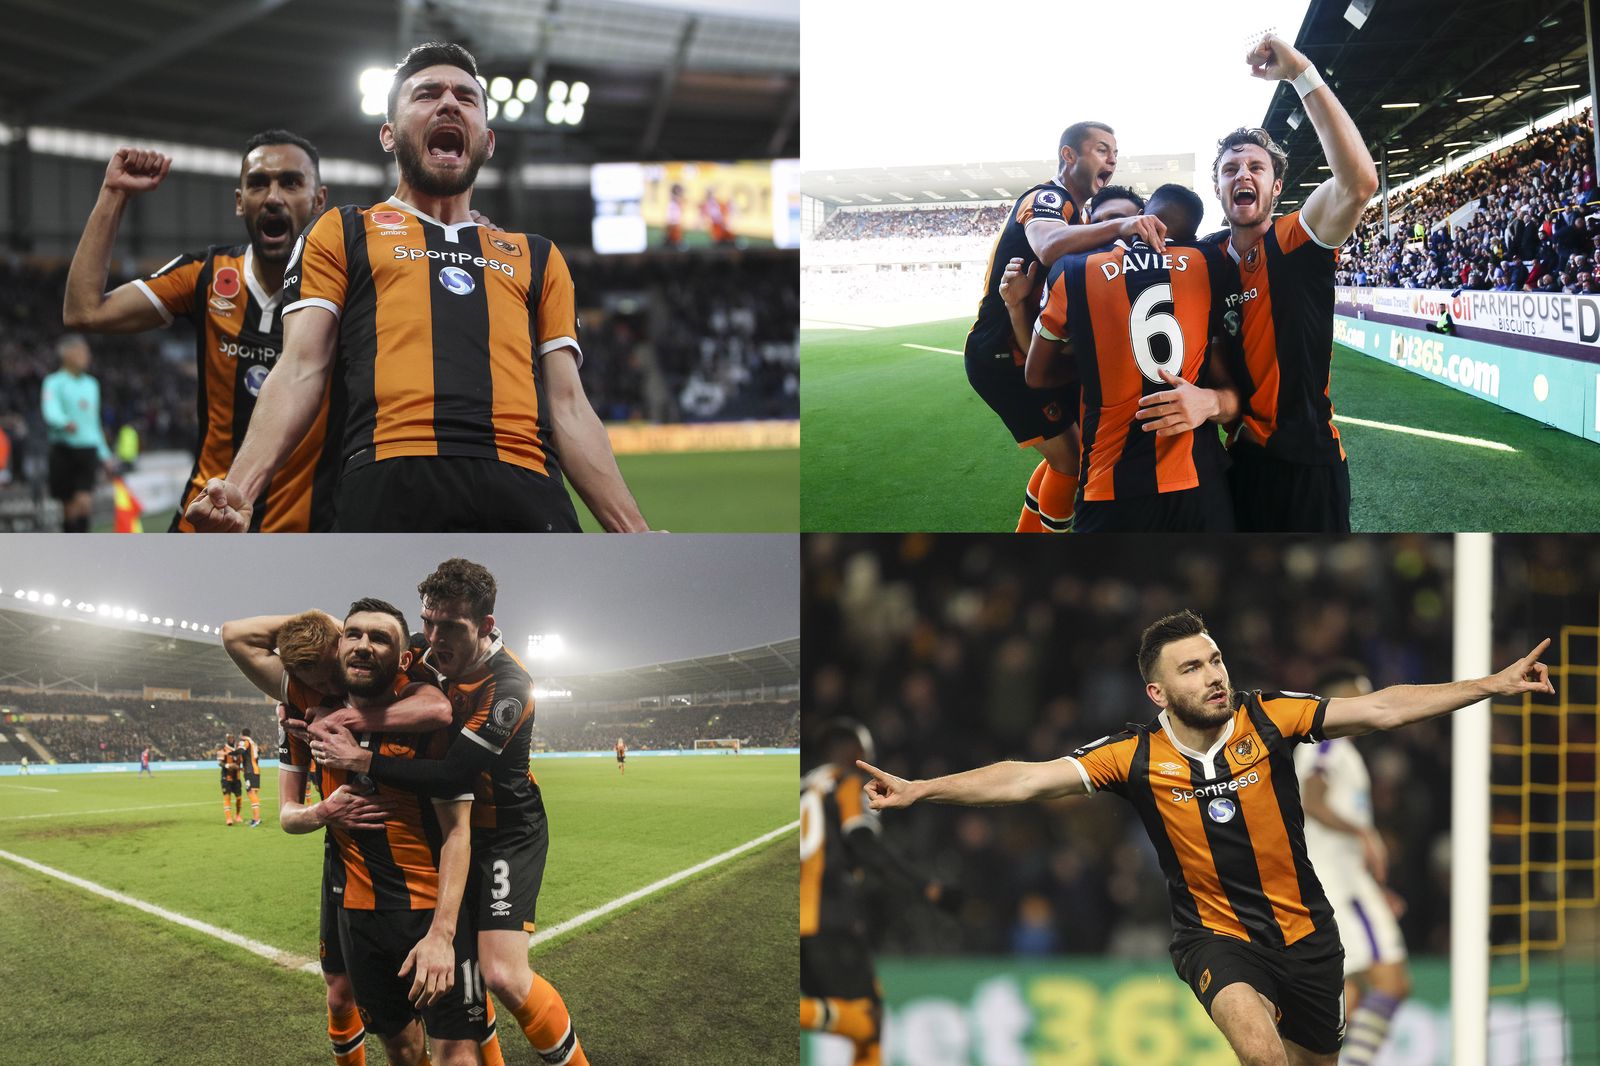 In September, I started shooting for Hull City on behalf of Focus Images. Hull have been on the end of a lot of defeats but some good celebrations from Robert Snodgrass have given me some decent photos at least.